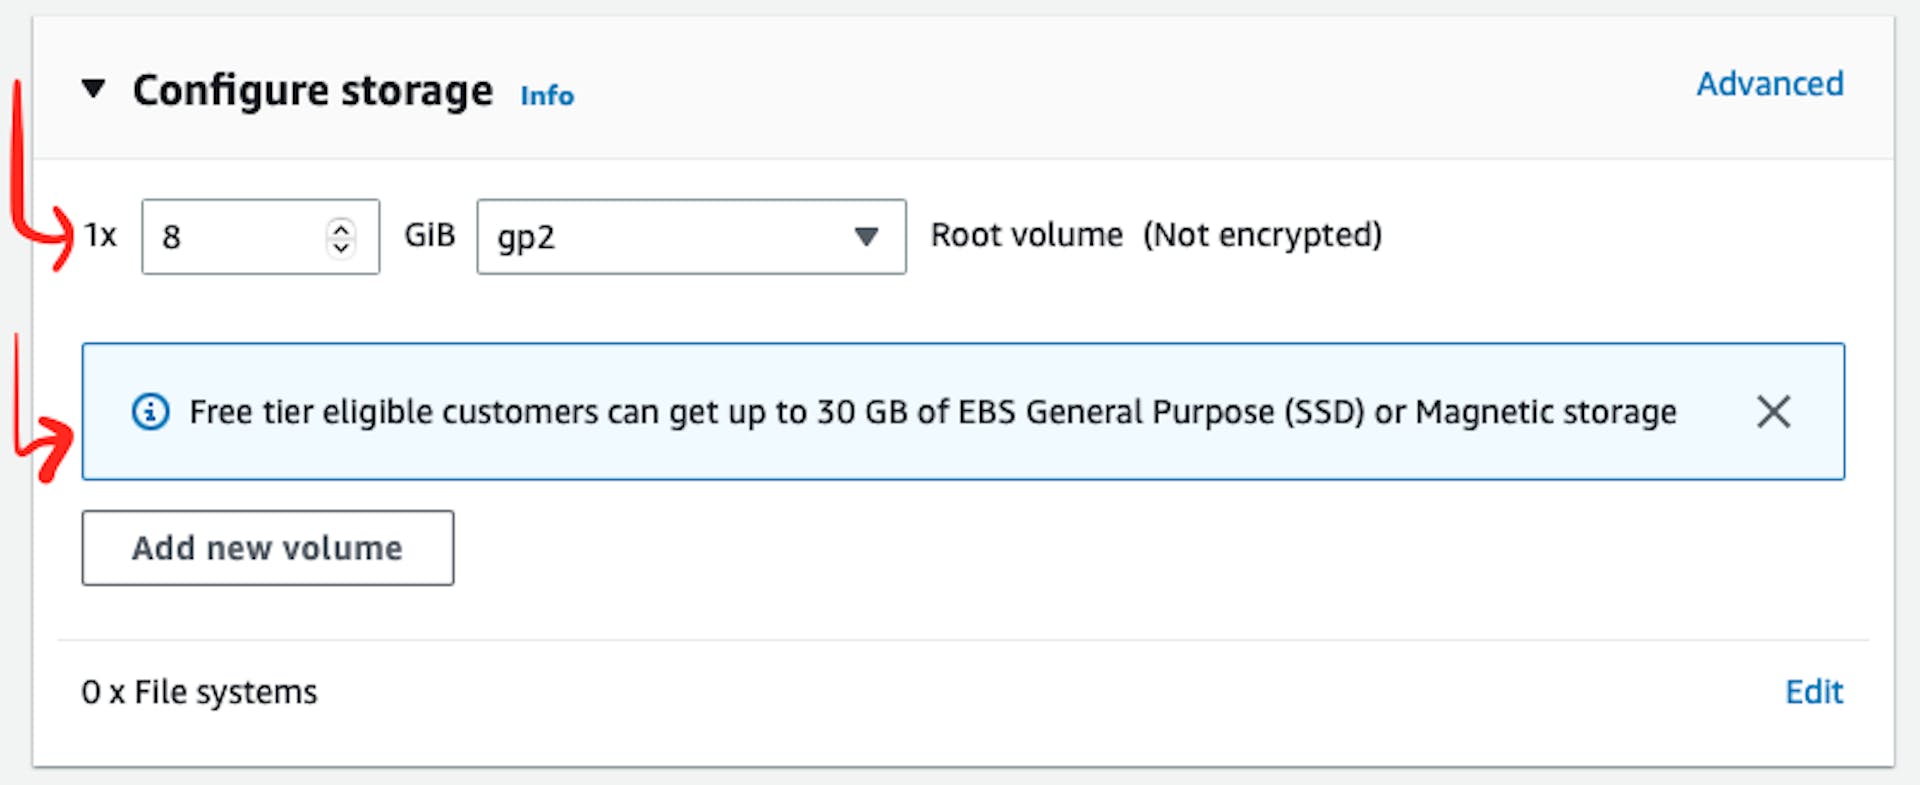 The screenshot of AWS web page with the pointer to storage possible configurations in "Configure storage" section